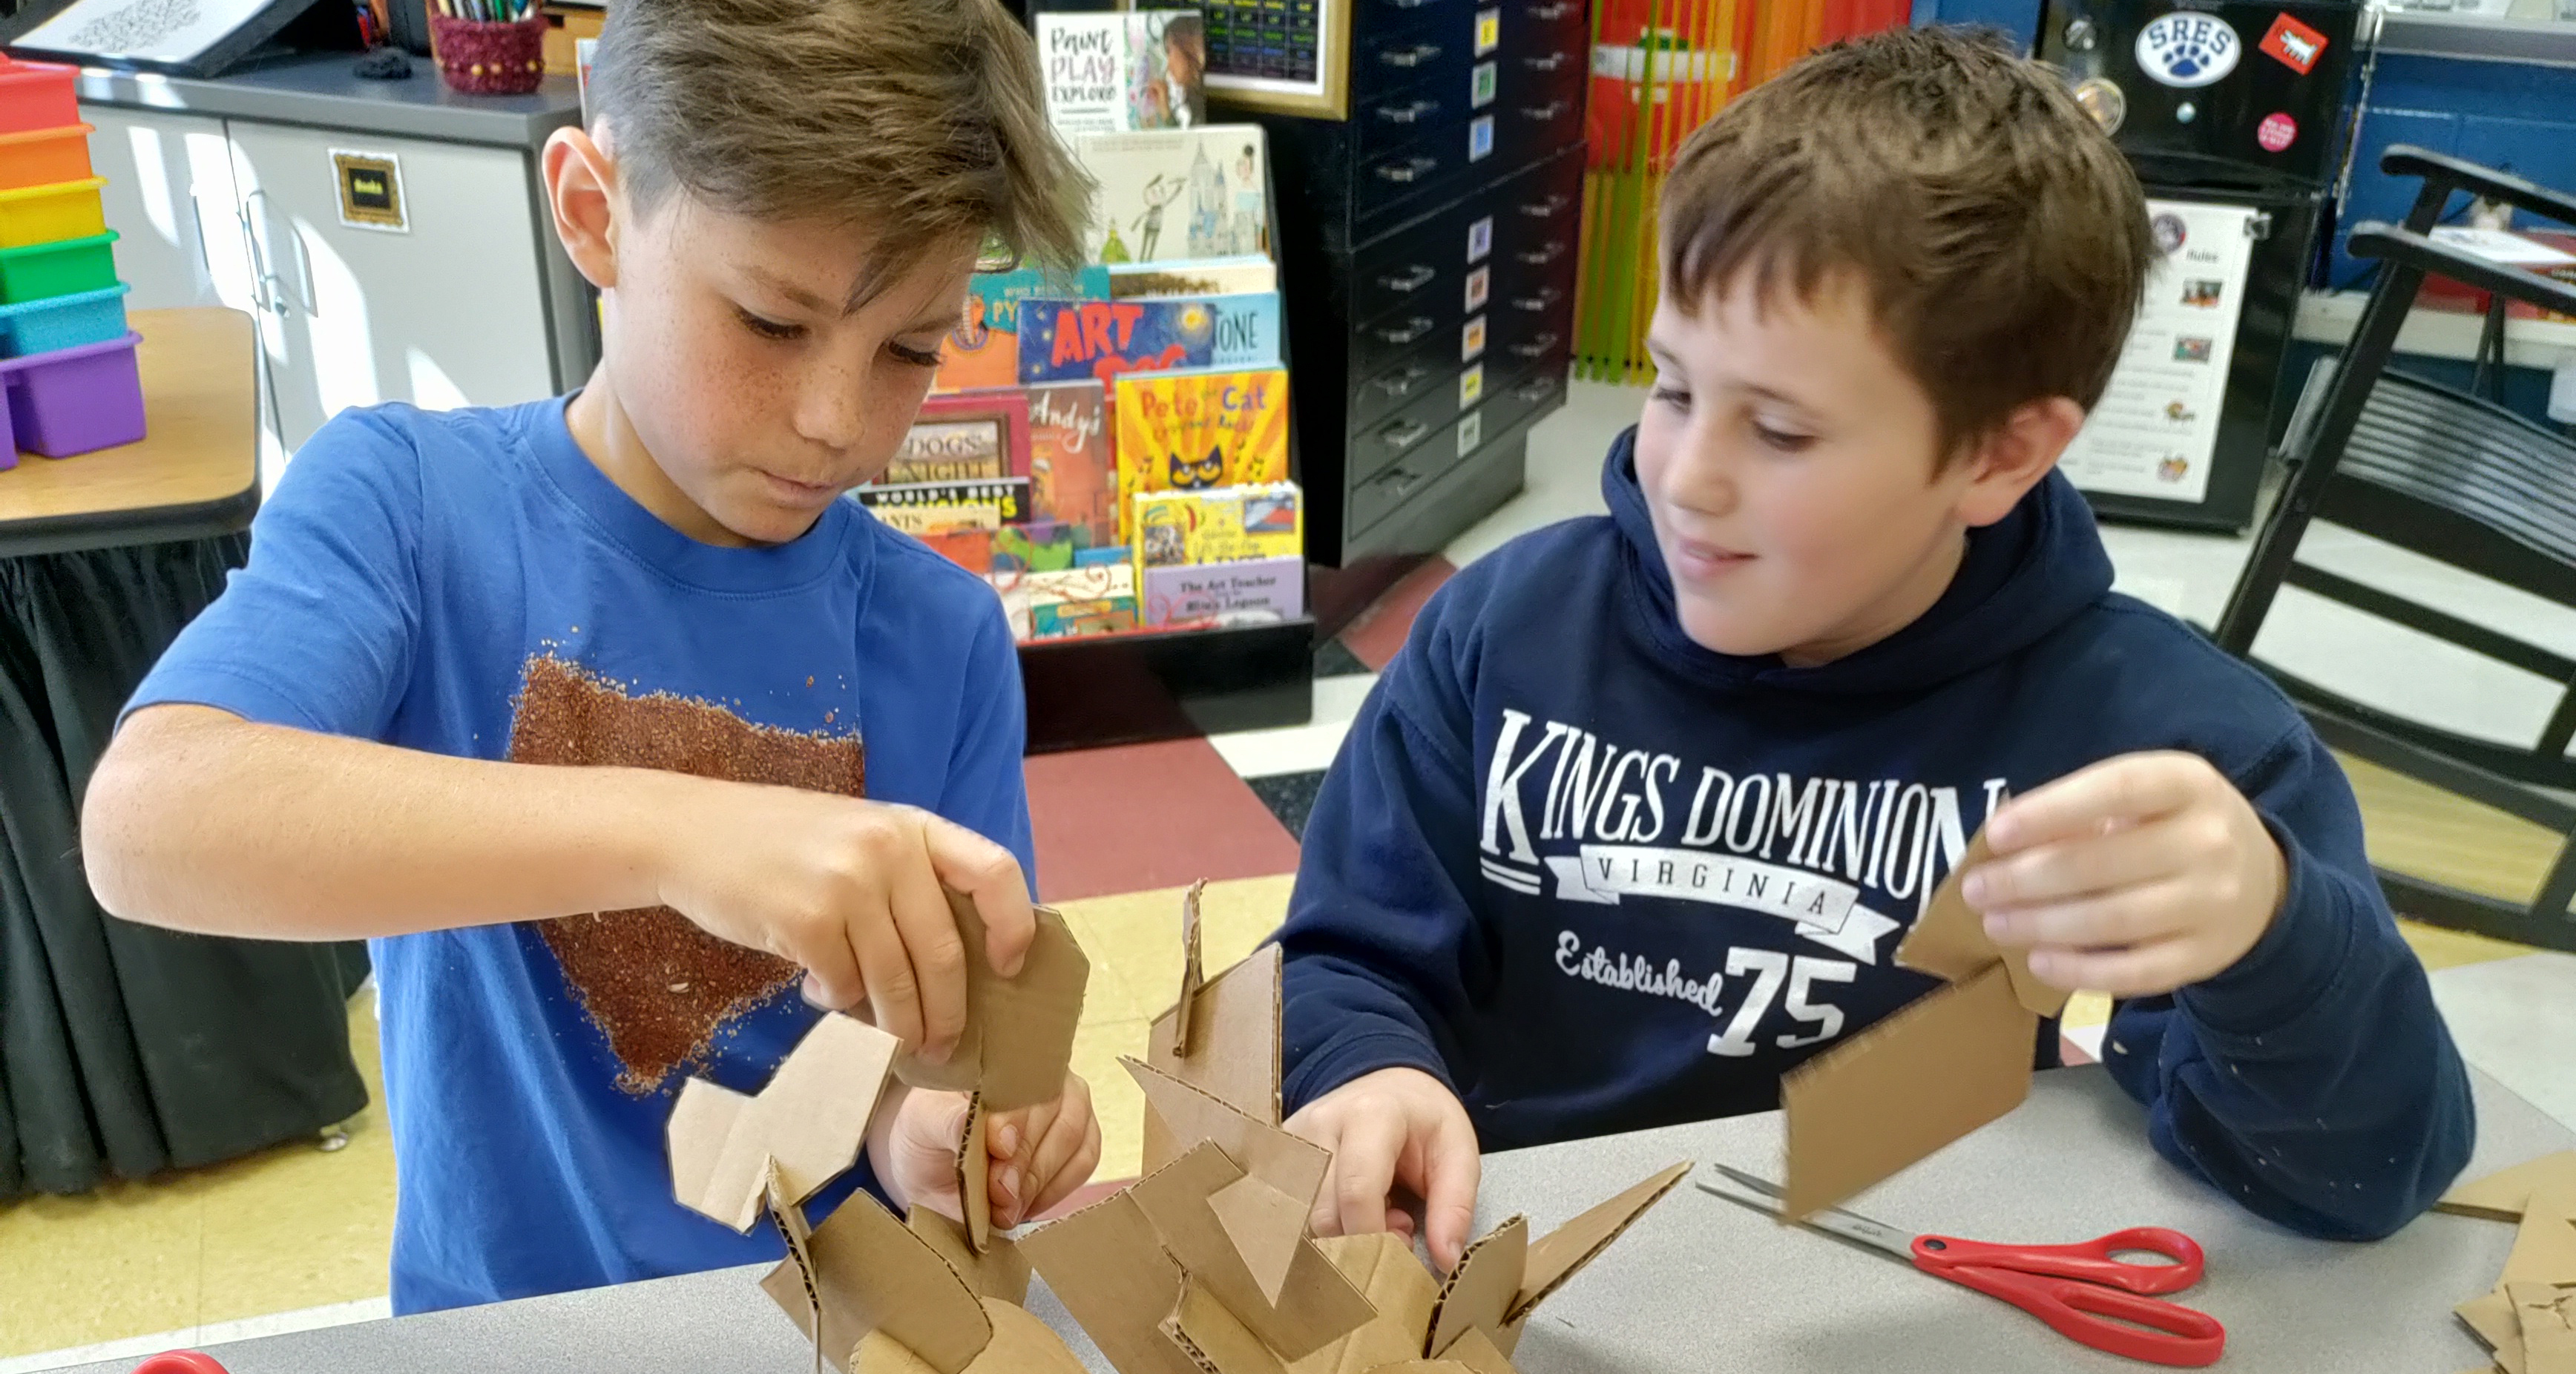 Two students working on a structure made of cardboard pieces